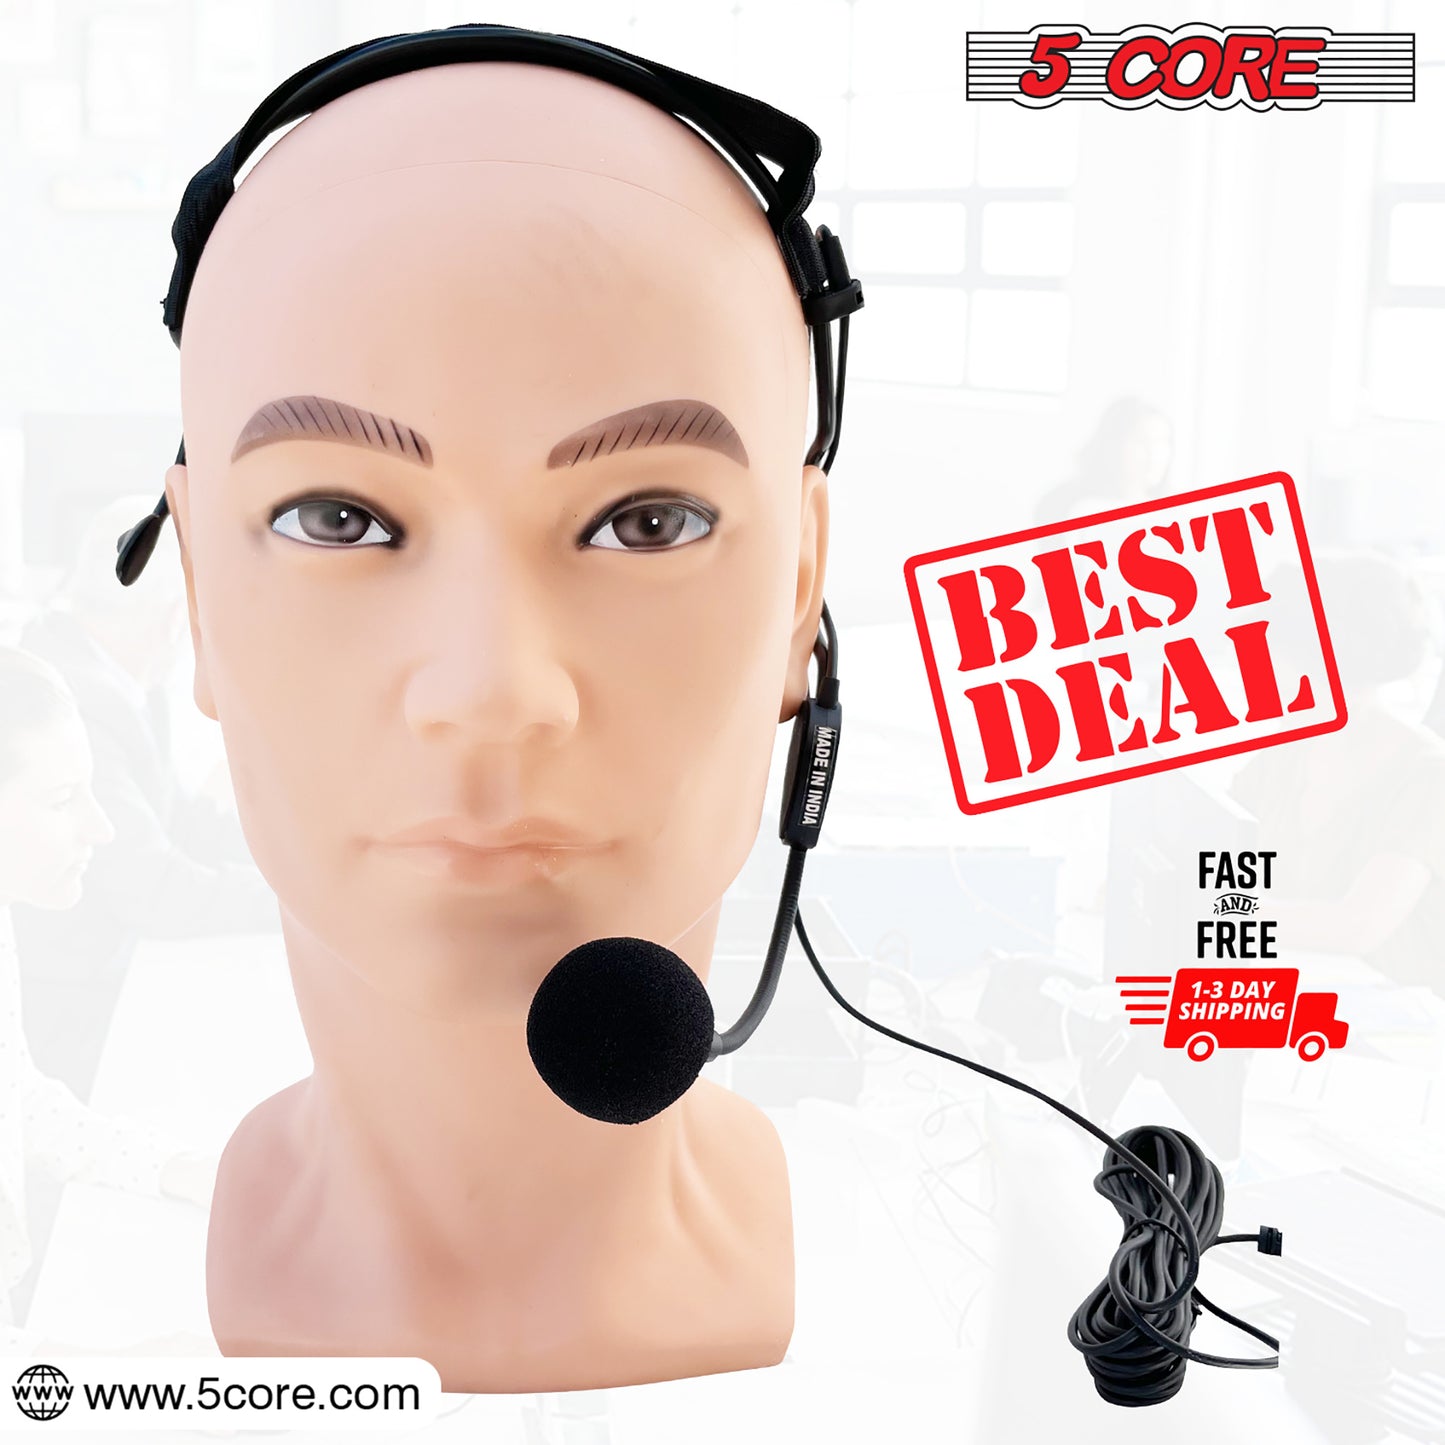 5 Core Wired Microphone Headset • w ¼ Inch Connector • Headworn Hanging Unidirectional Condenser Mic • Flexible Boom for Voice Amplifier • for Speaking Teachers Presentations- MIC HM 01